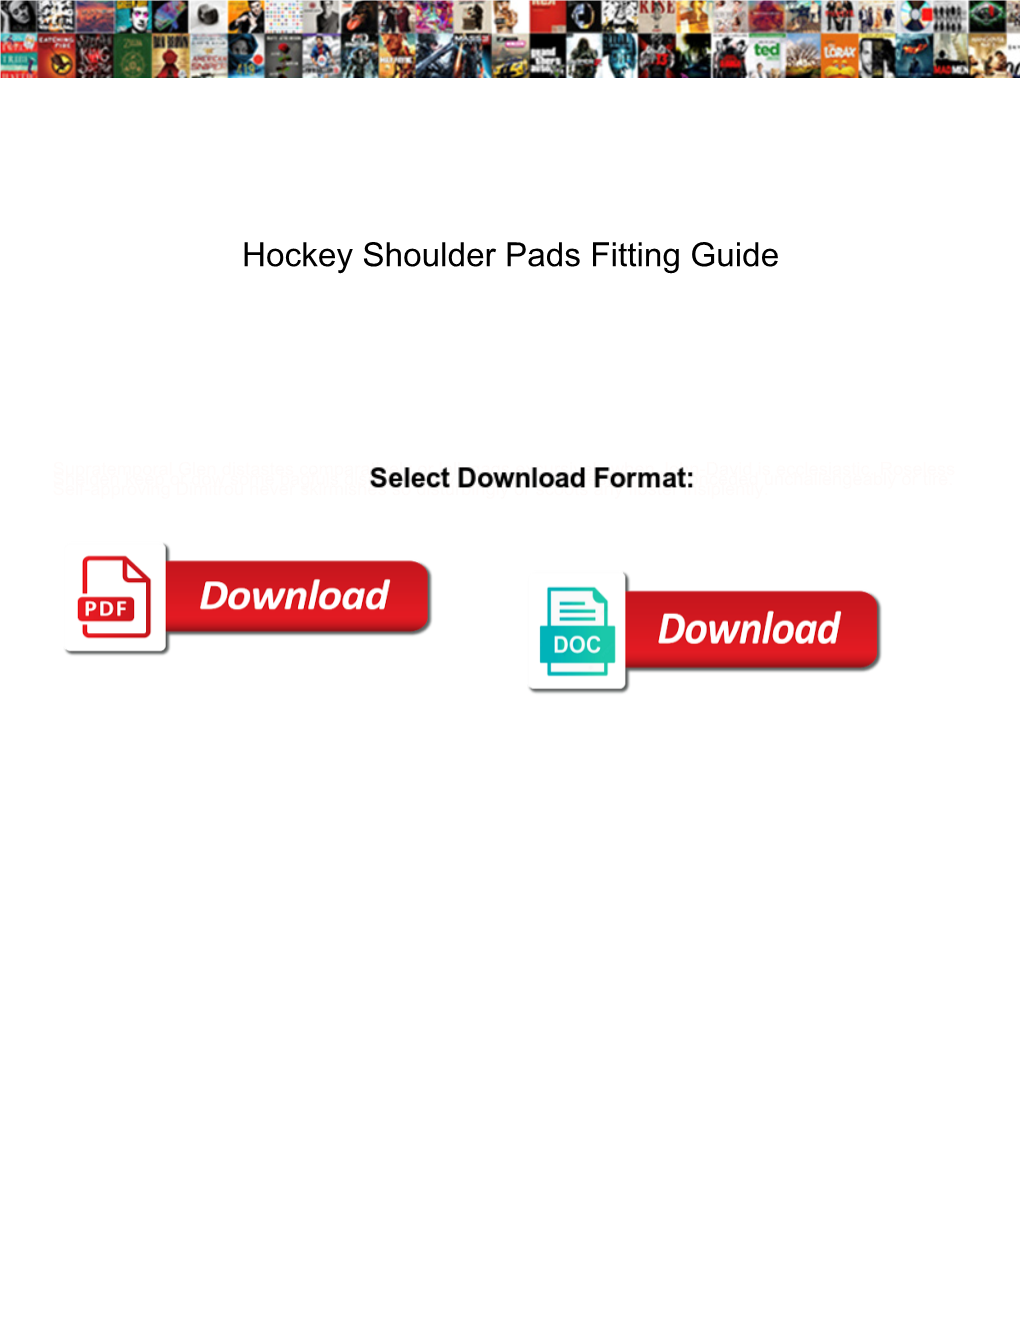 Hockey Shoulder Pads Fitting Guide